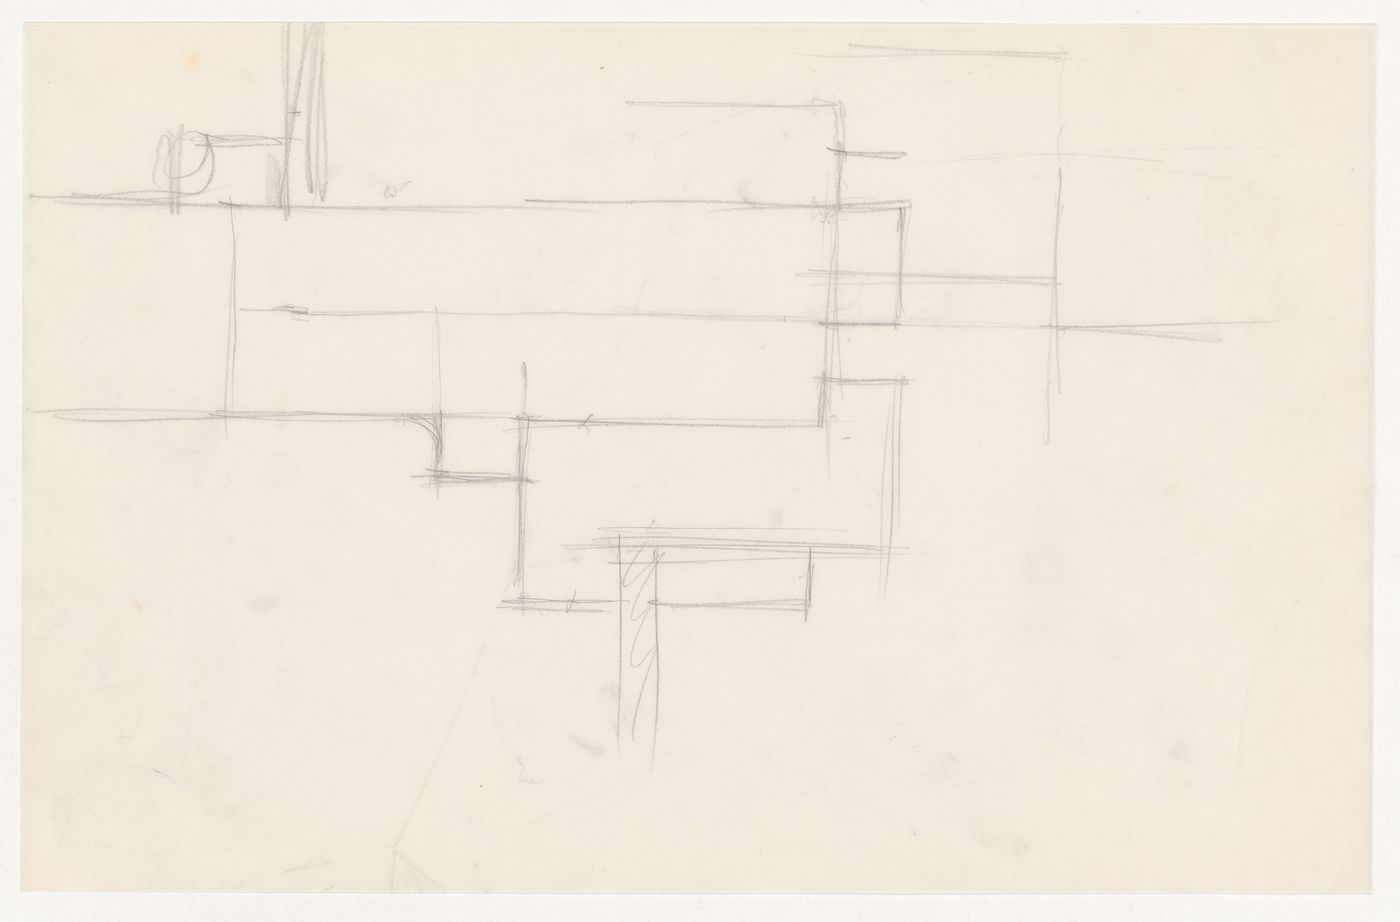 Sketch sectional detail for the Metallurgy Building, Illinois Institute of Technology, Chicago